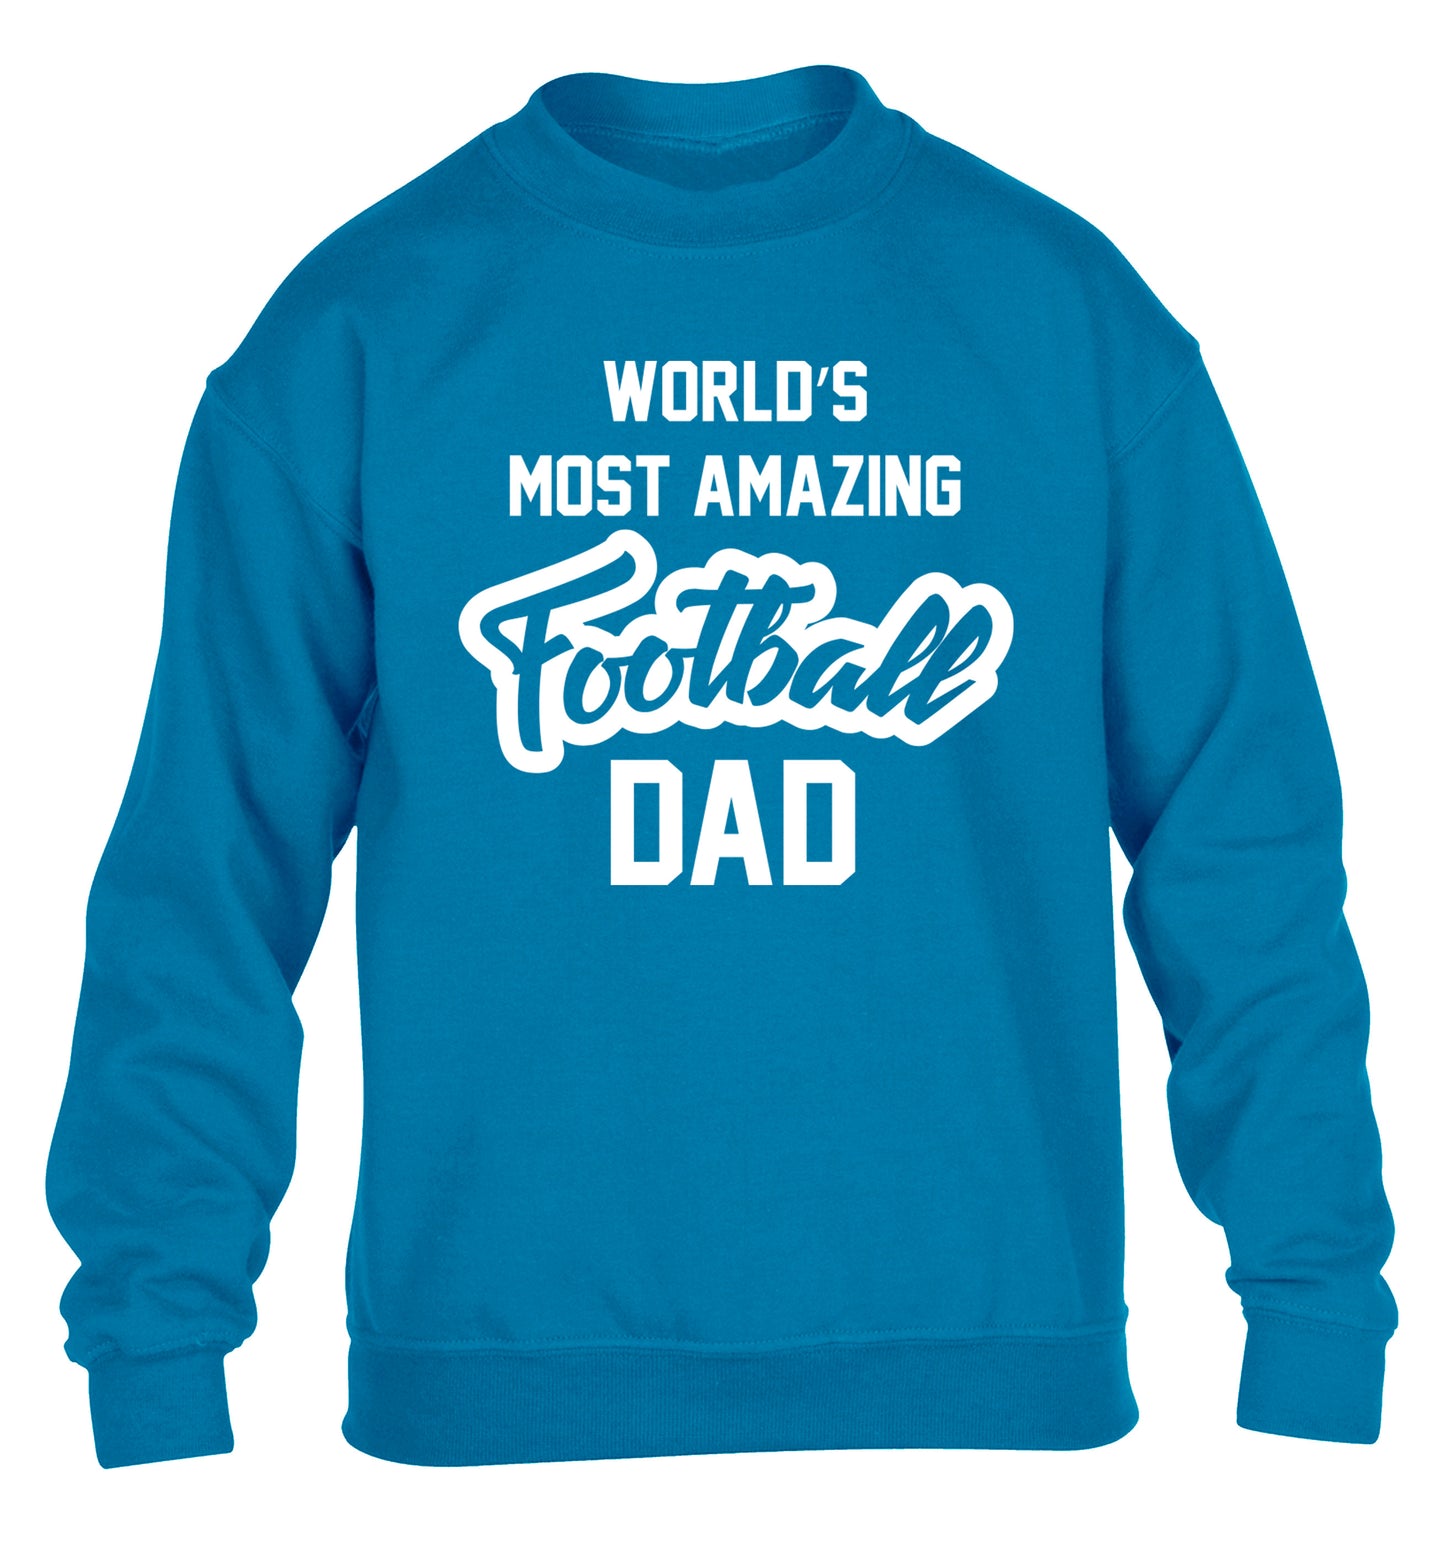 Worlds most amazing football dad children's blue sweater 12-14 Years